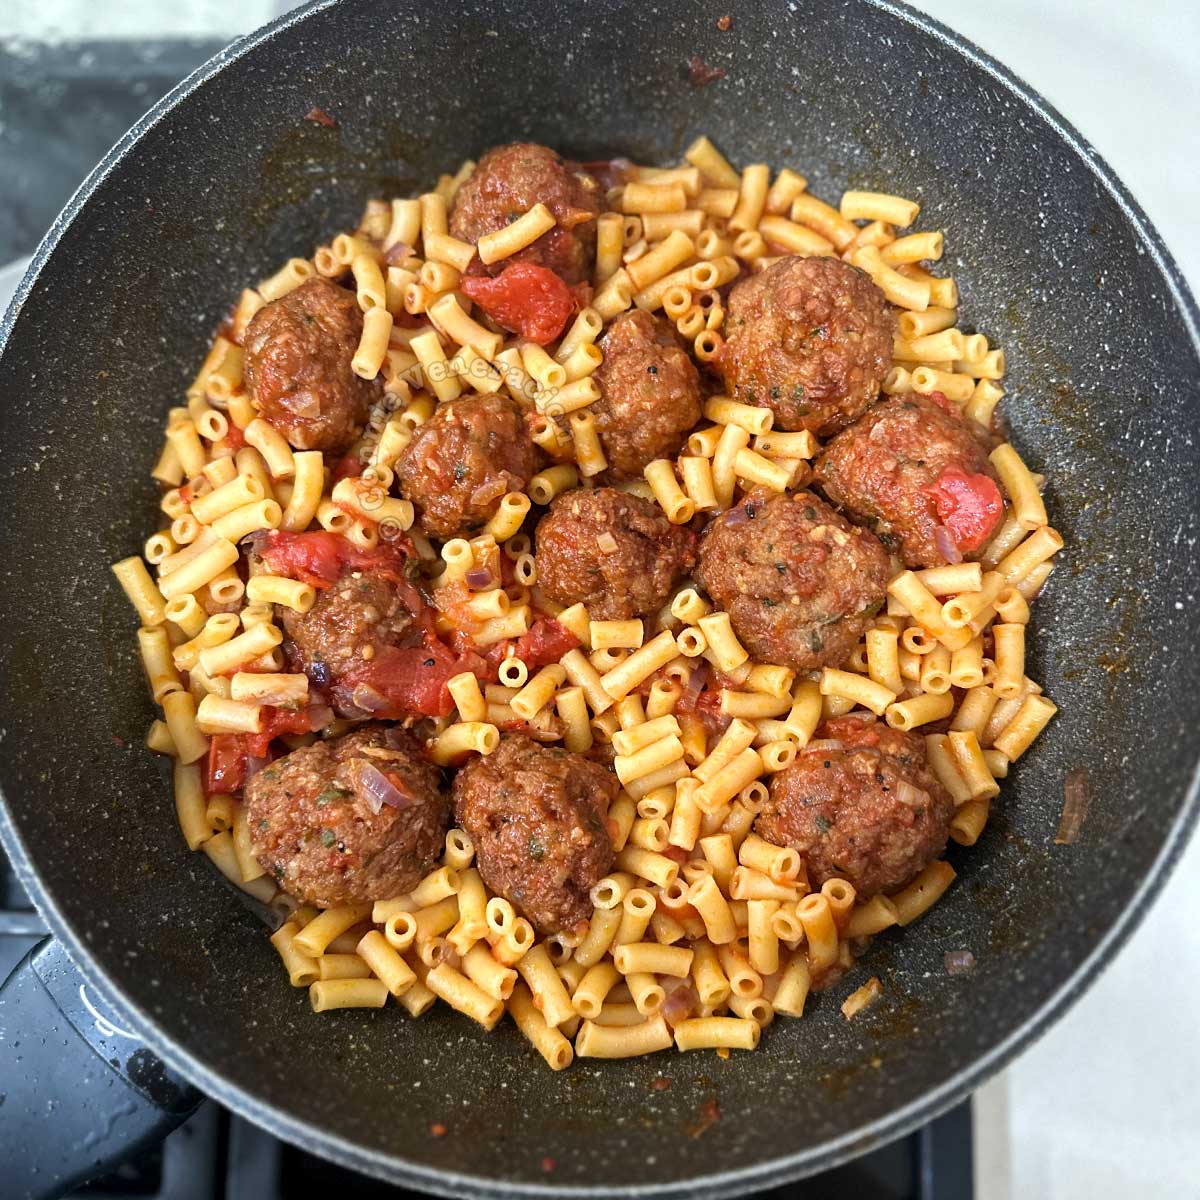 Cooked macaroni and meatballs in tomato sauce in wok